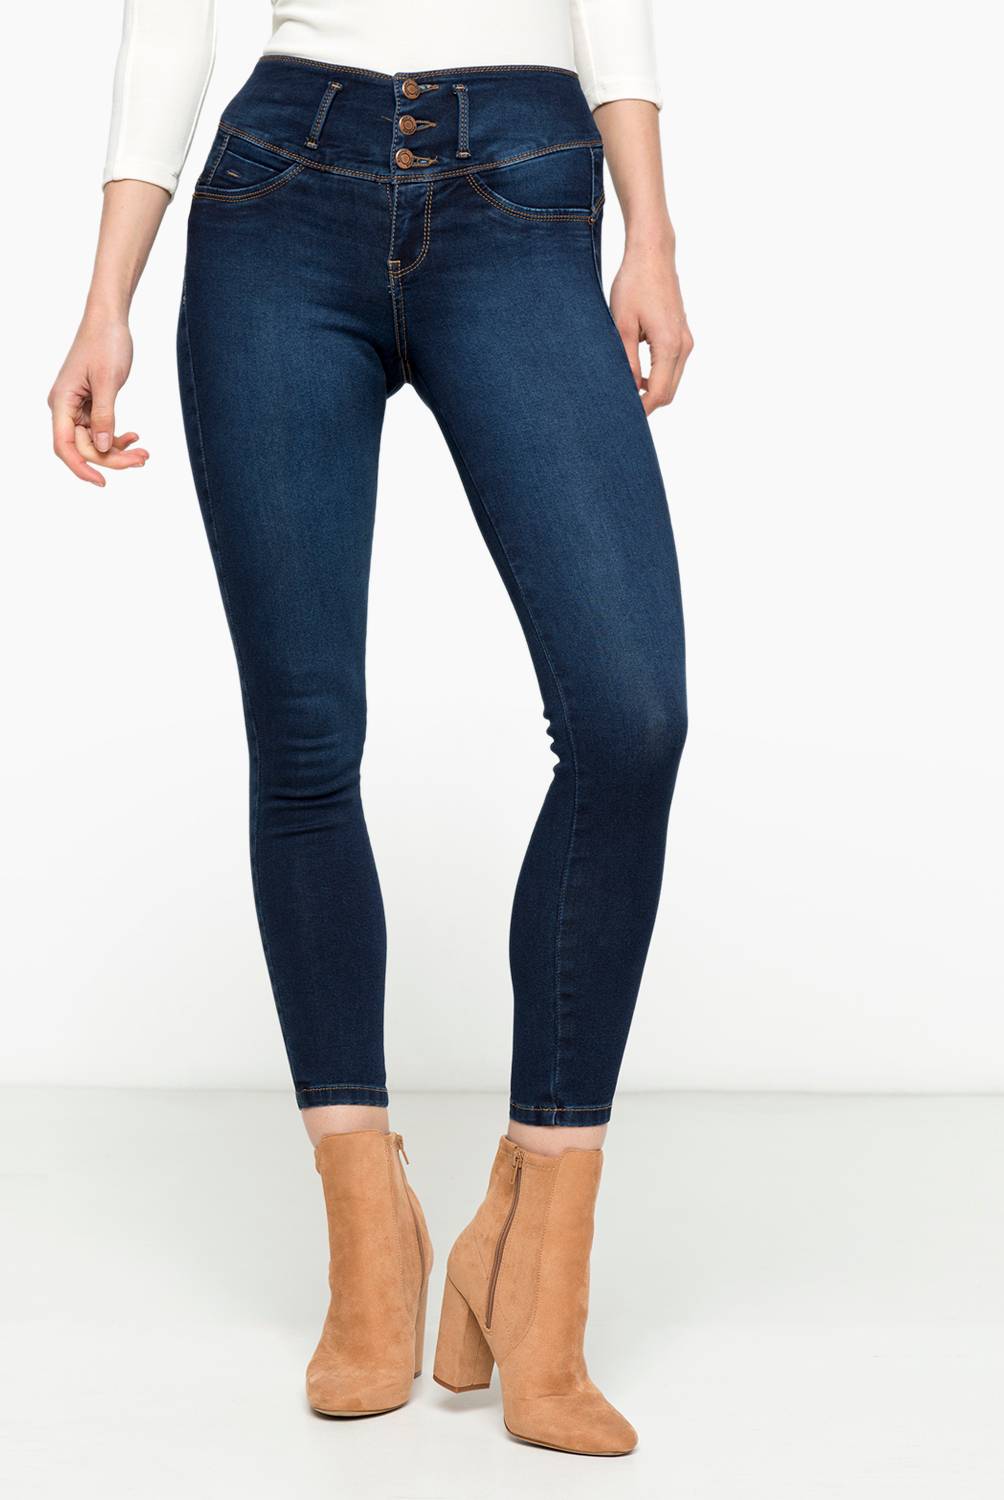 MOSSIMO - Jeans Push Up Mujer